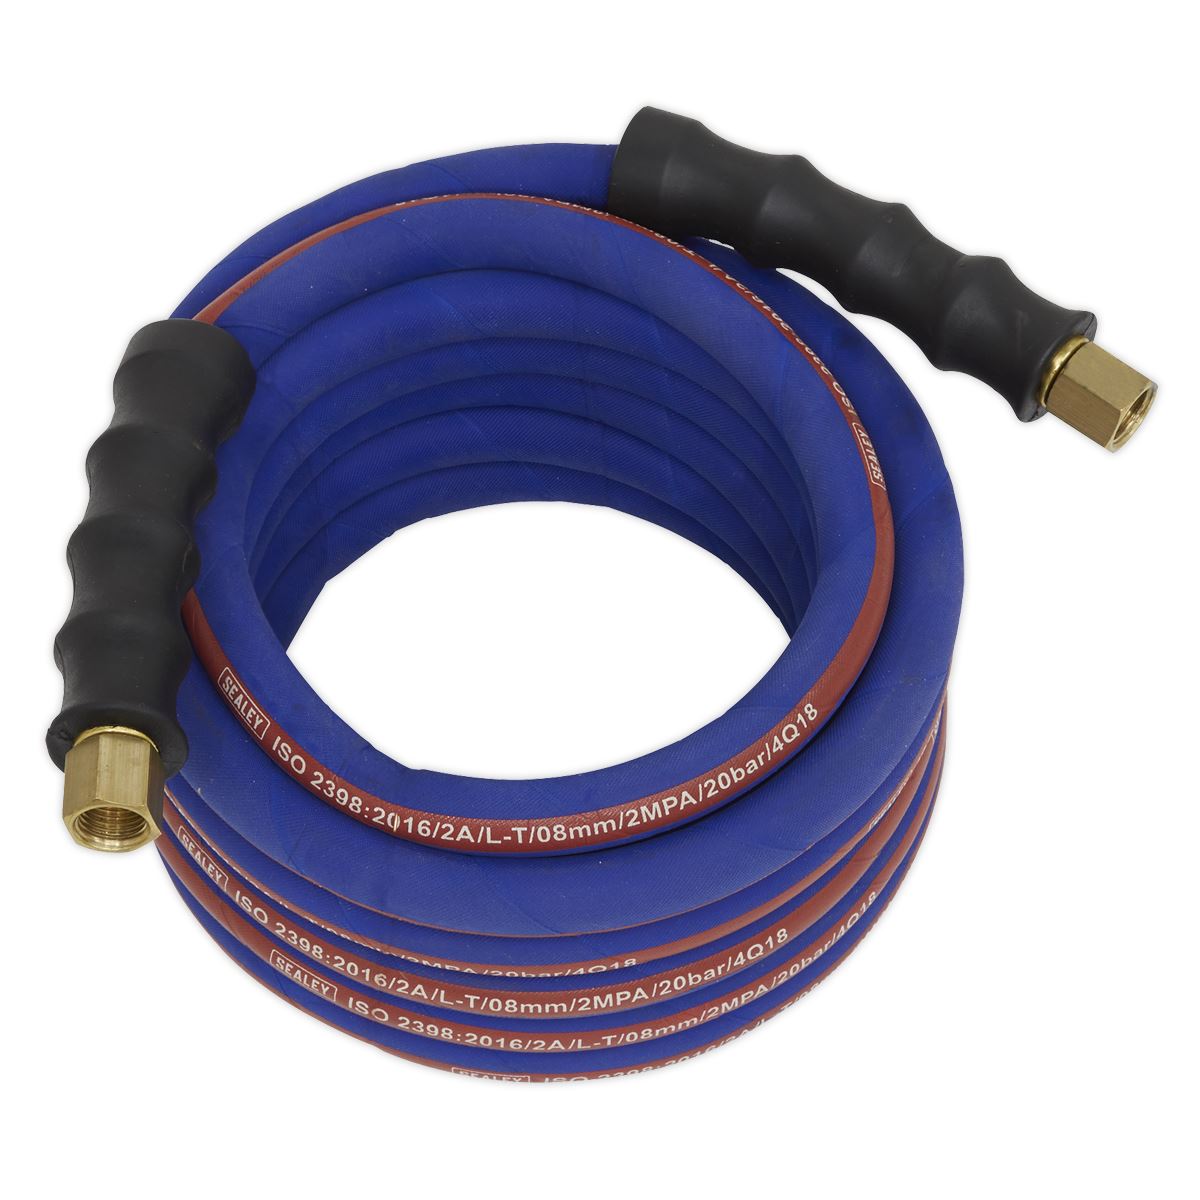 Sealey Air Hose 5m x Ø8mm with 1/4"BSP Unions Extra-Heavy-Duty